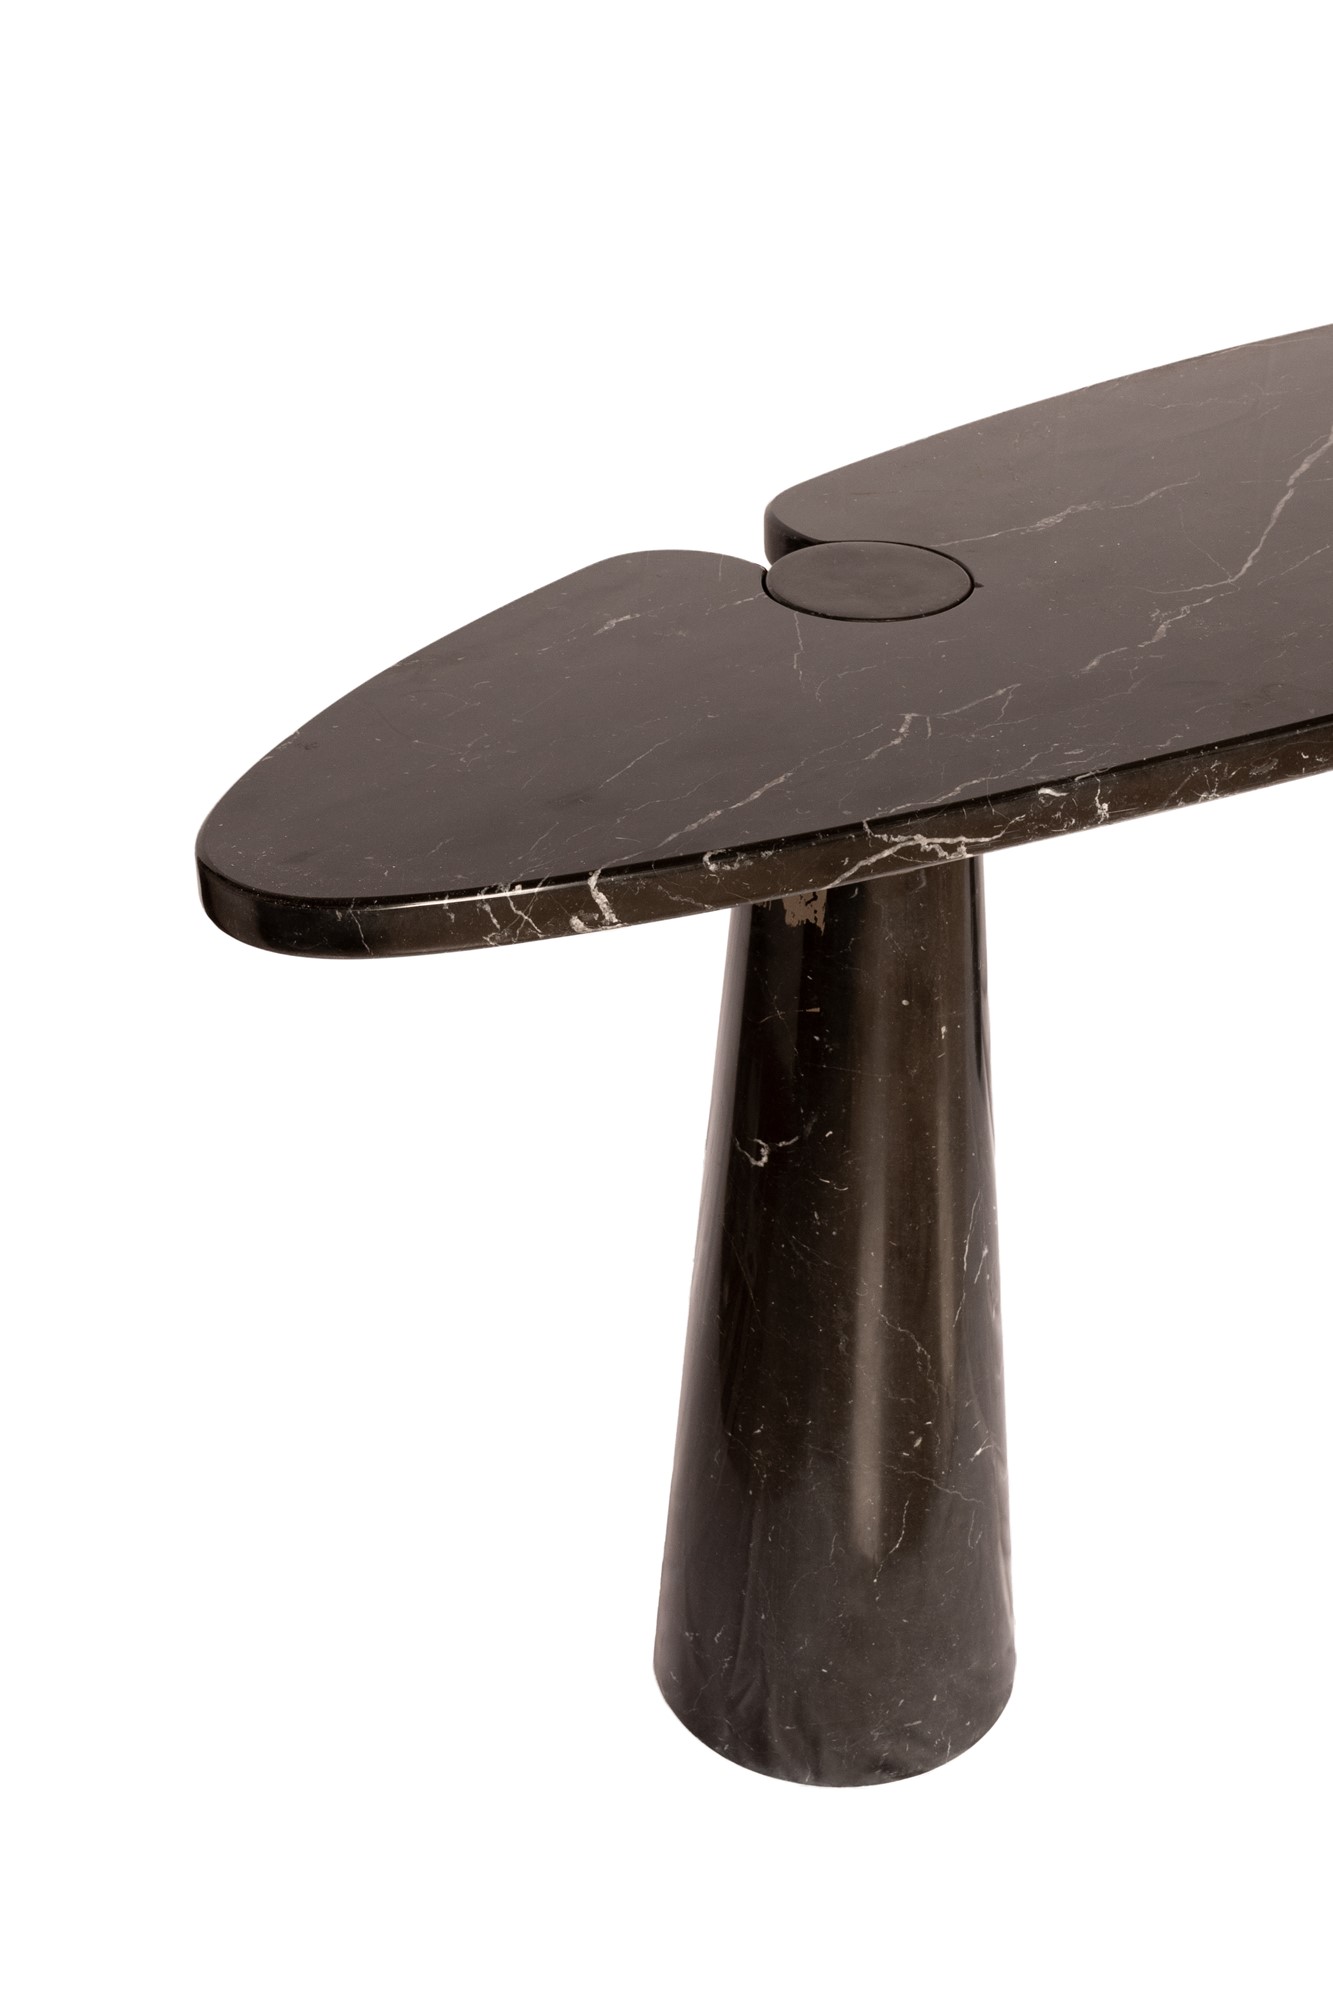 Angelo Mangiarotti Black marble console table by Marquina from the Eros series - Image 21 of 27